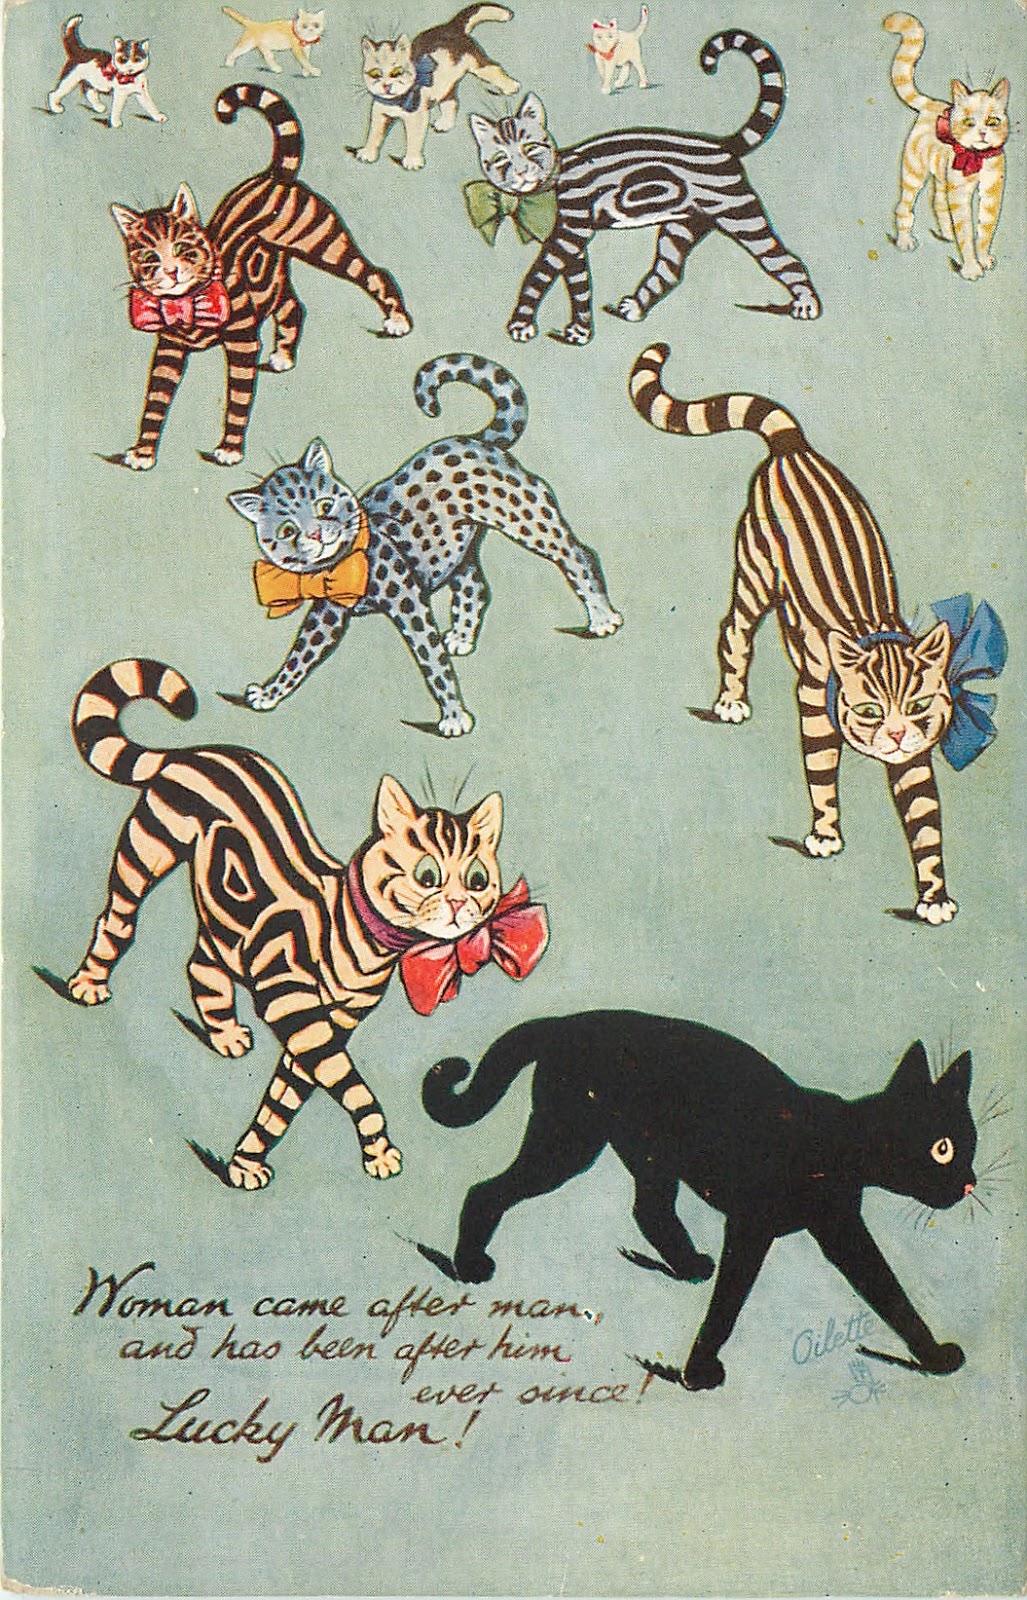 Louis Wain illustration with: caption, cat, cat:tabby, clothes:bowtie, color:black, color:blue, color:brown, color:white, manysubjects, meta:needsyear, postcard, realistic, signature, smiling, spotted, subject:love, subject:marriage